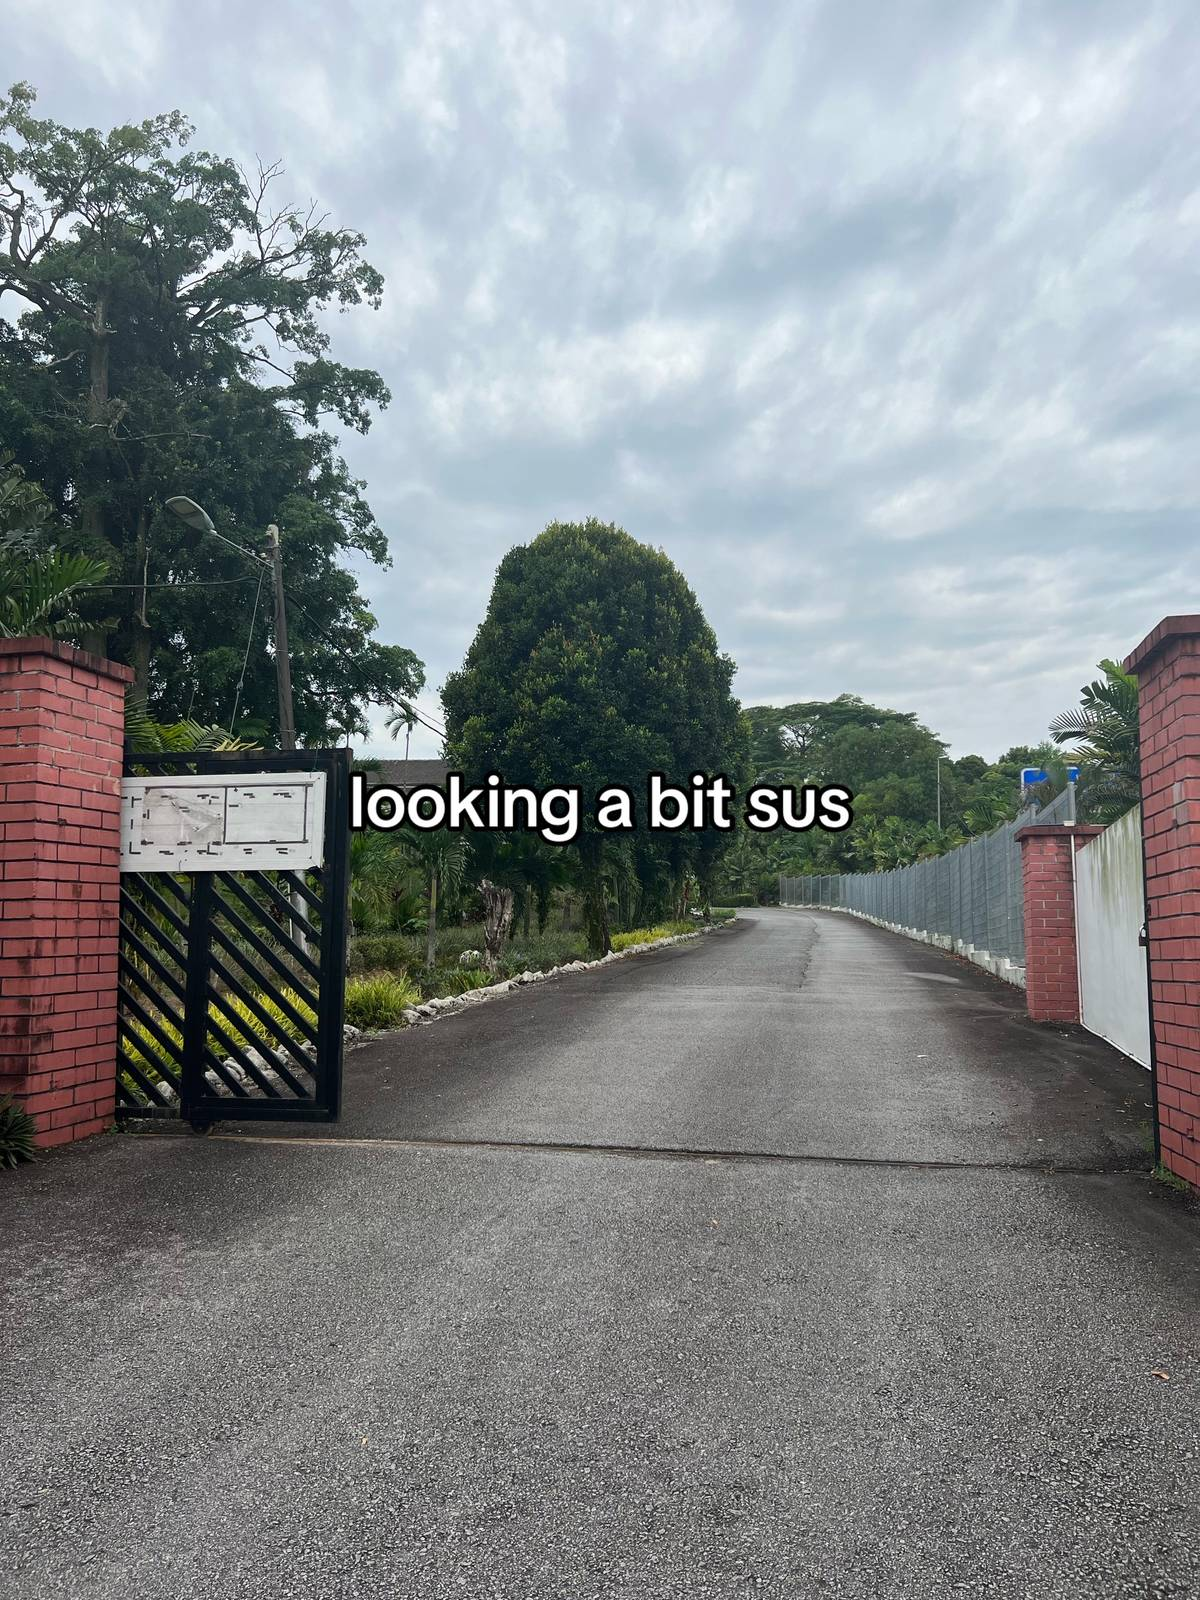 Woman checks into home for the disabled in jb by mistake via airbnb, netizens say it looks decent